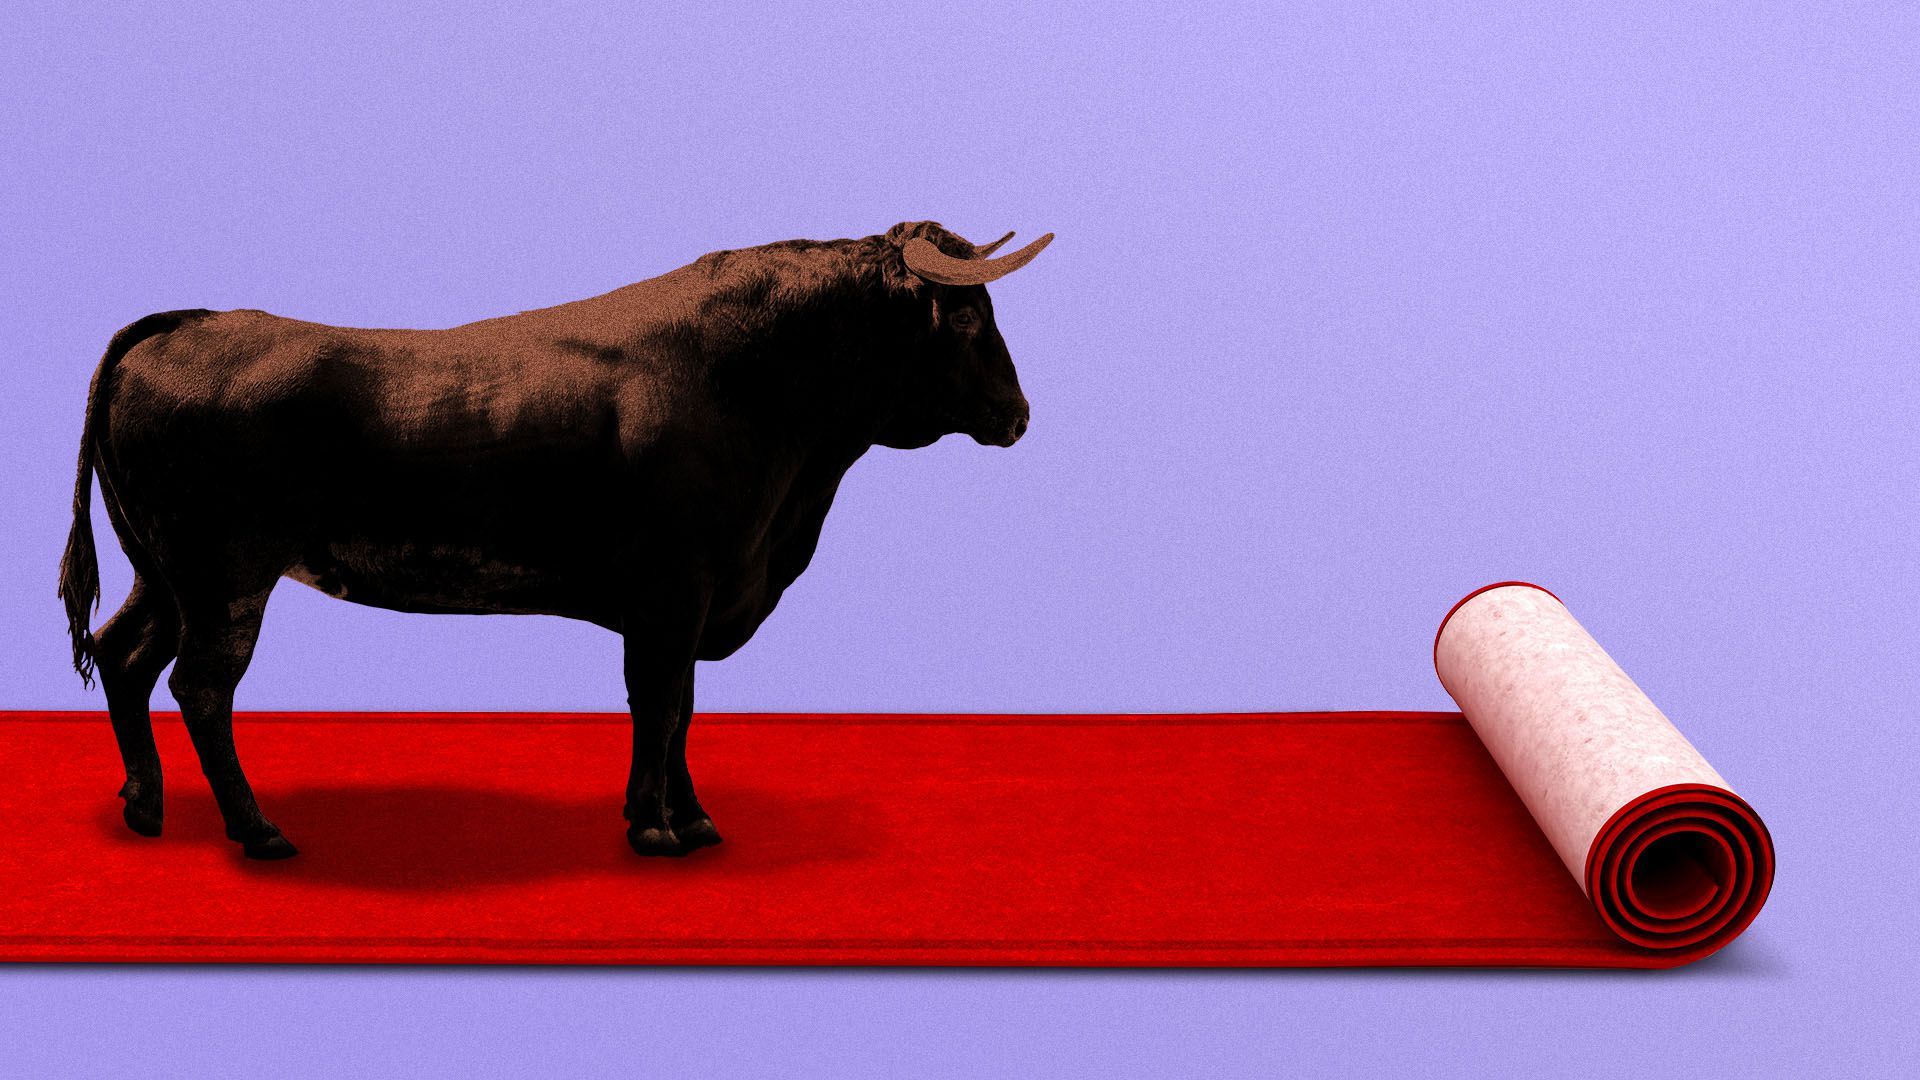 Illustration of a bull on a red carpet that's rolling up